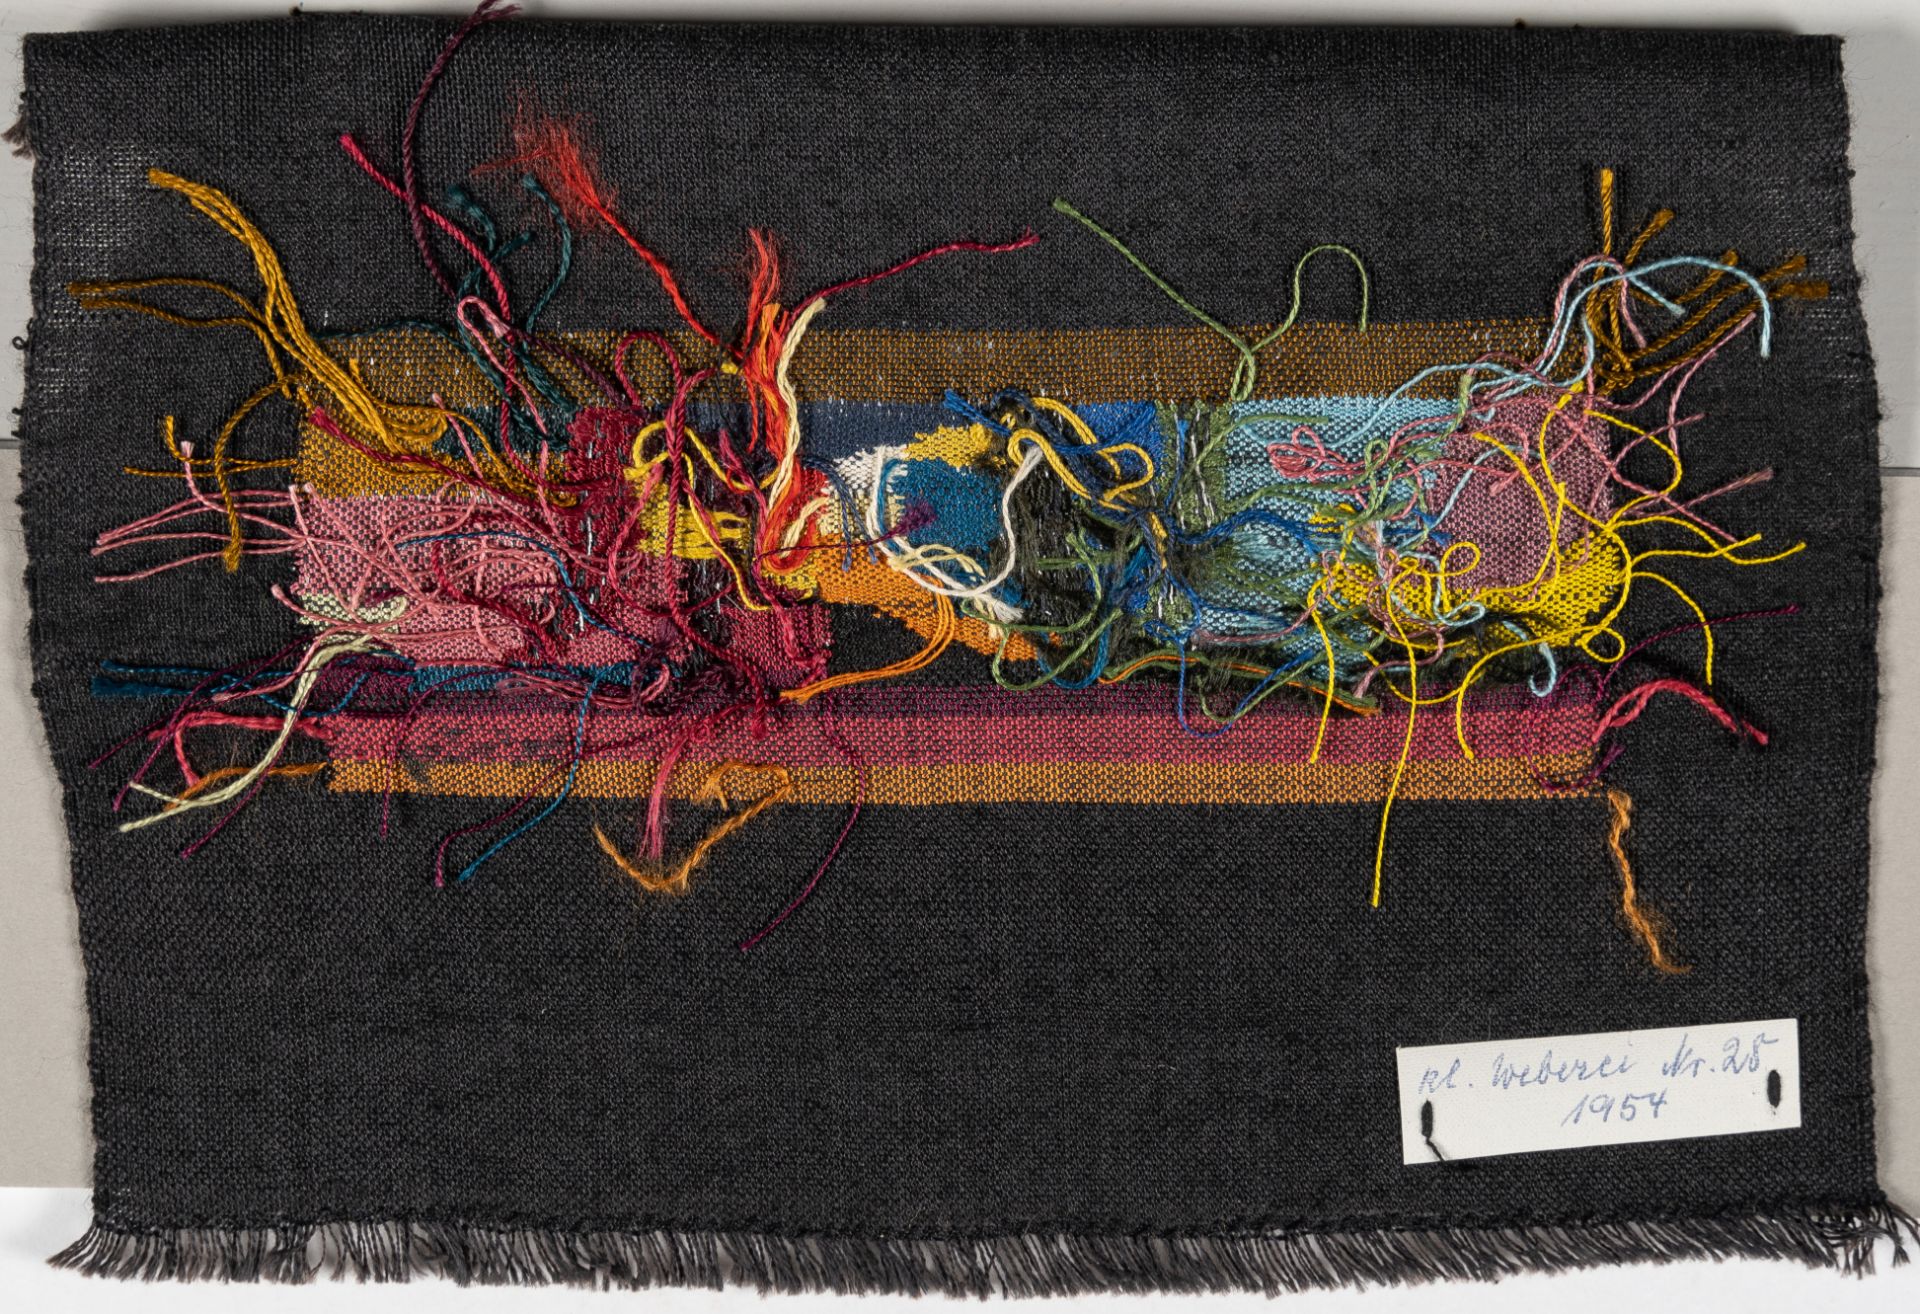 Woty Werner, Small weaving, No. 28.Woven wool. (1954). Ca. 18 x 23 cm. Signed lower right and titled - Image 3 of 3